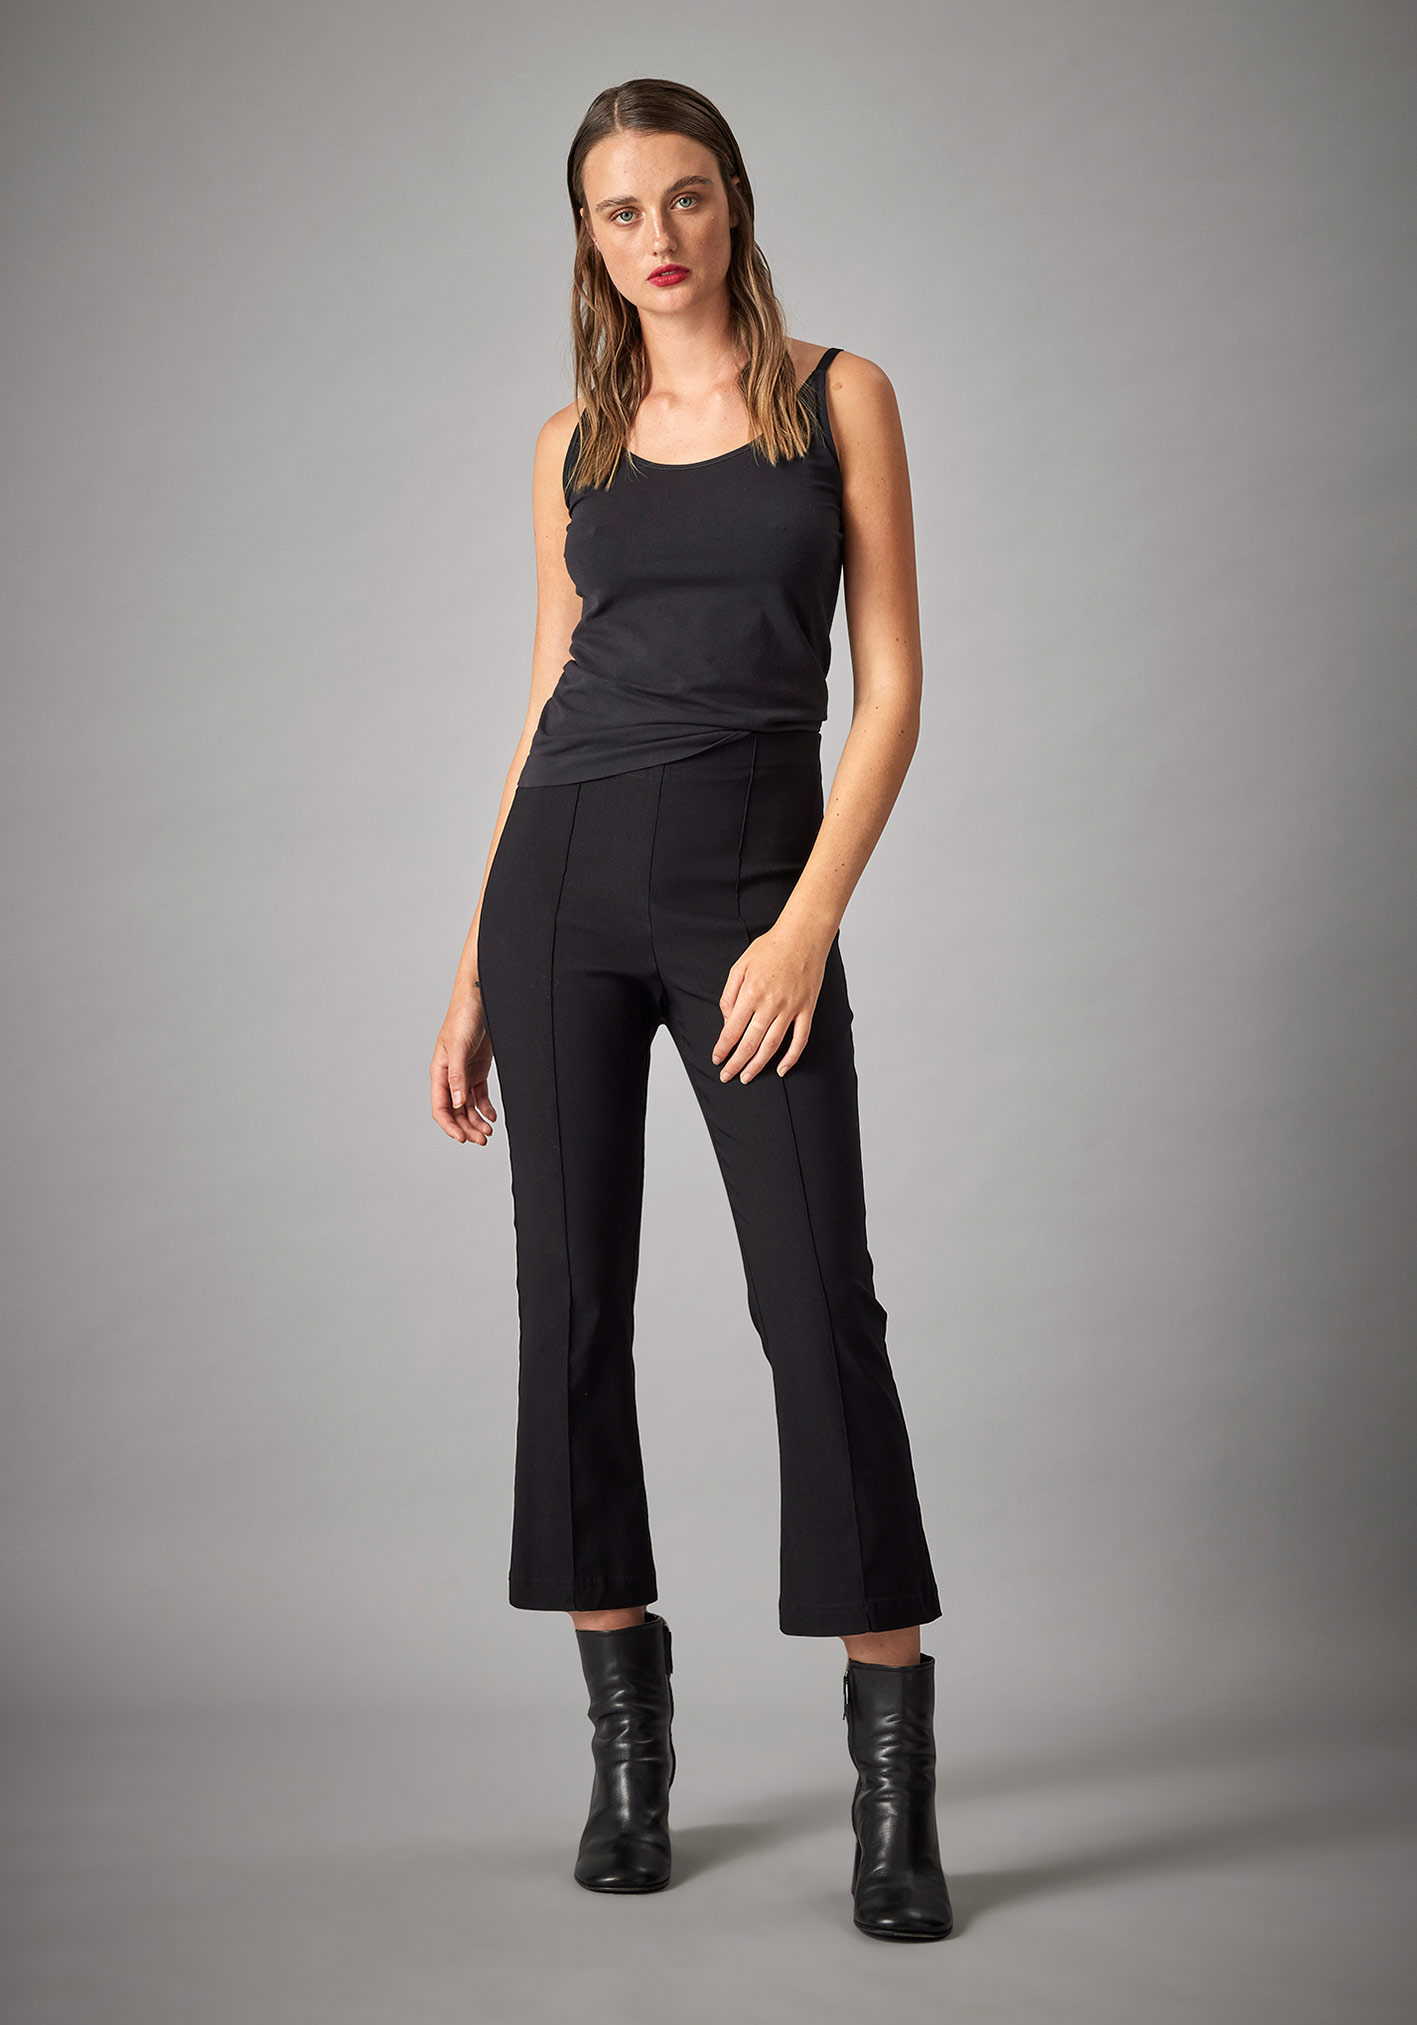 buy the latest Pintuck 3 Qtr Flare Pant online